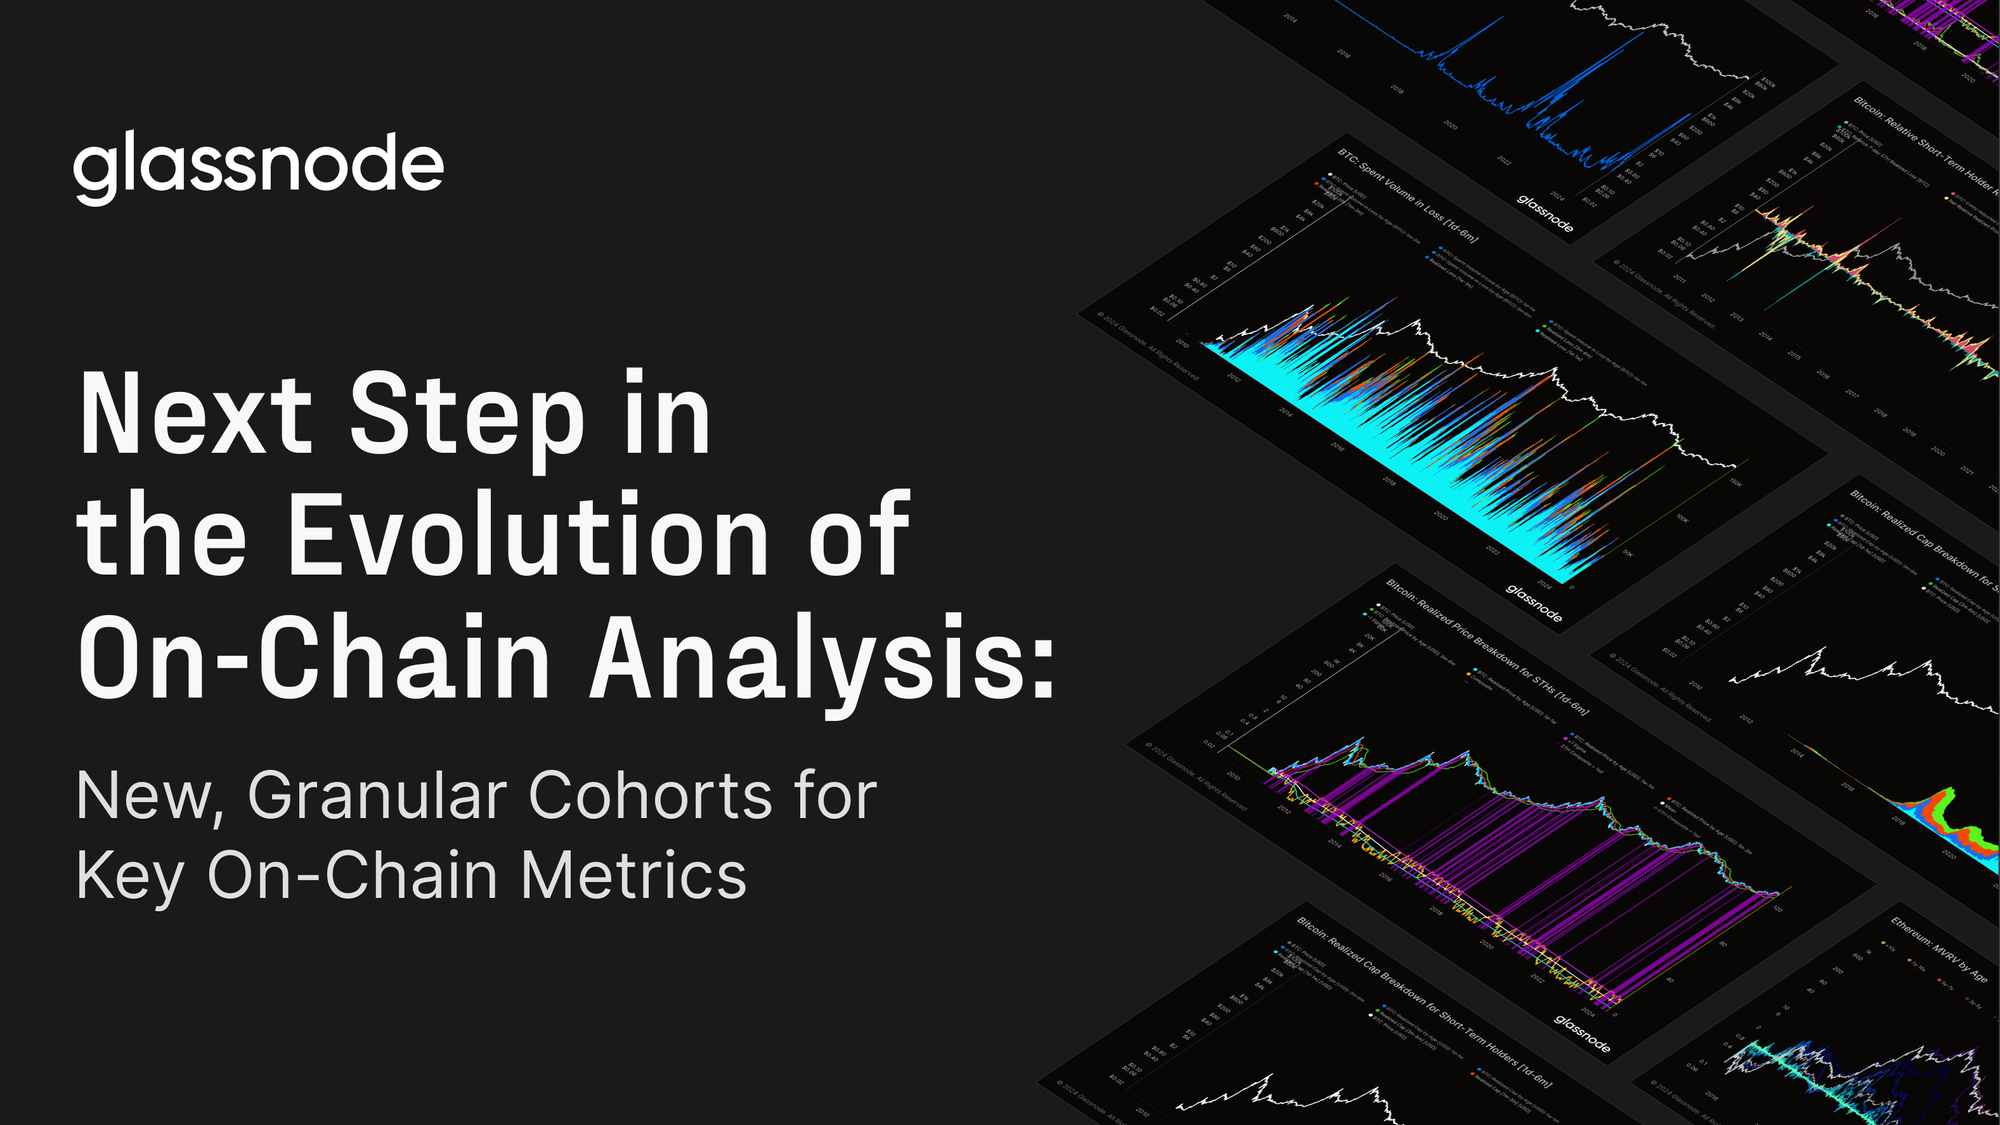 Next Step in the Evolution of On-Chain Analysis: New, Granular Cohorts for Key On-Chain Metrics